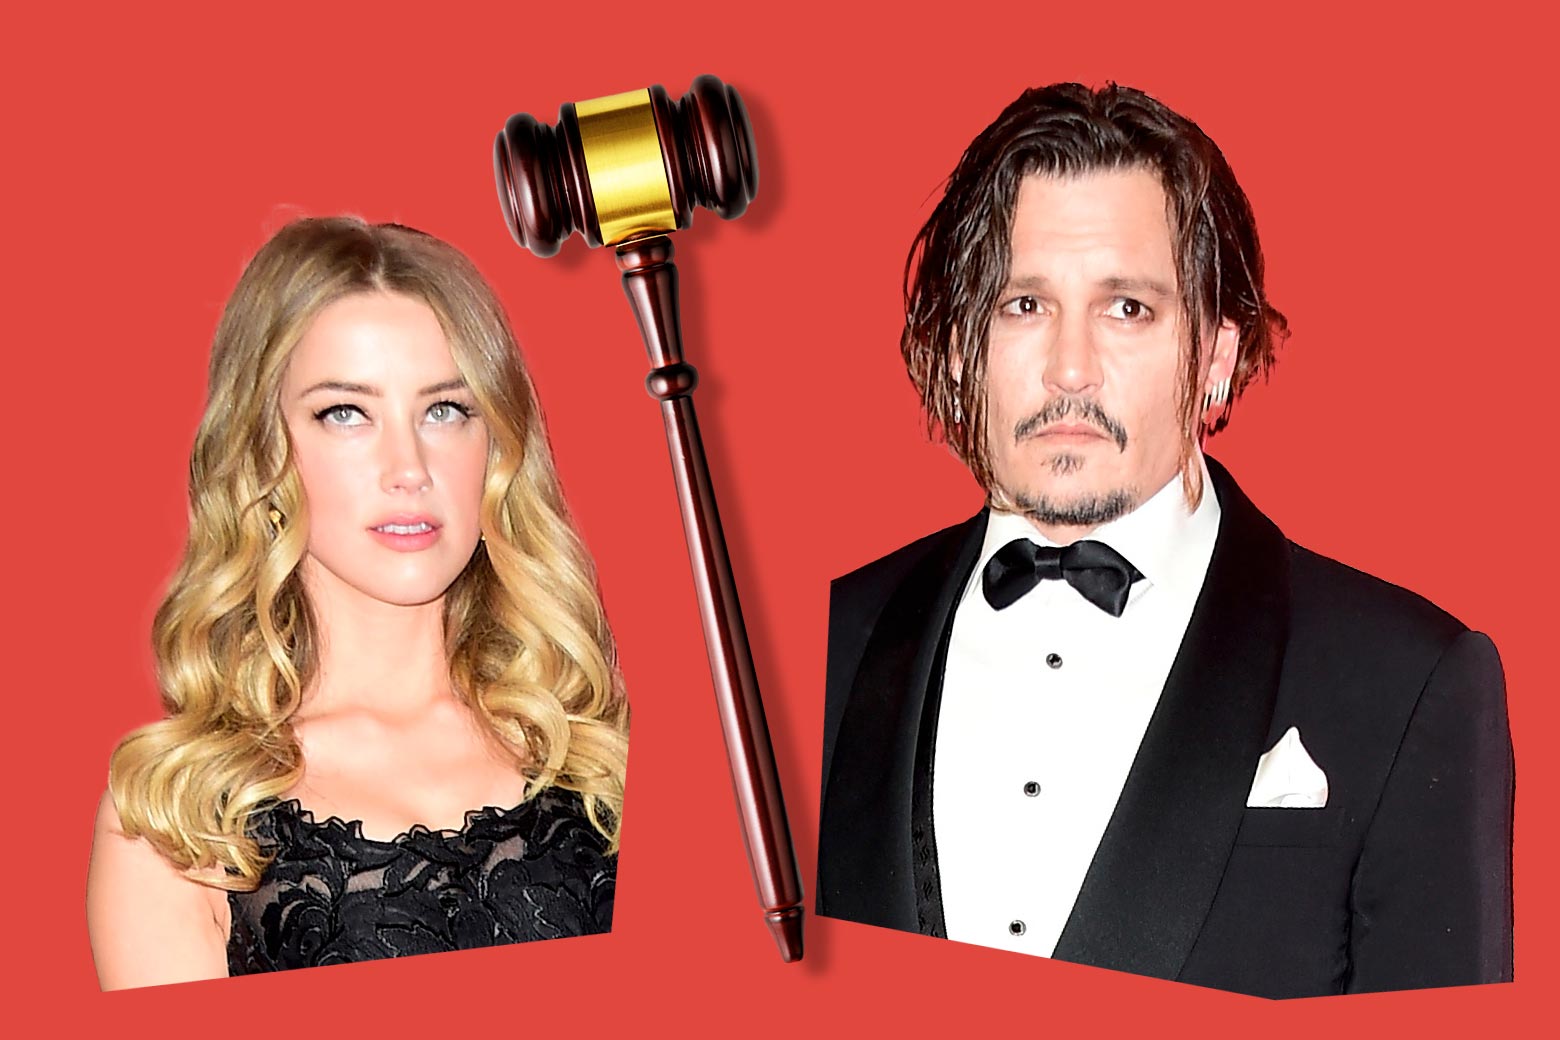 Collage of a judge's gavel between photos of Amber Heard and Johnny Depp in formalwear